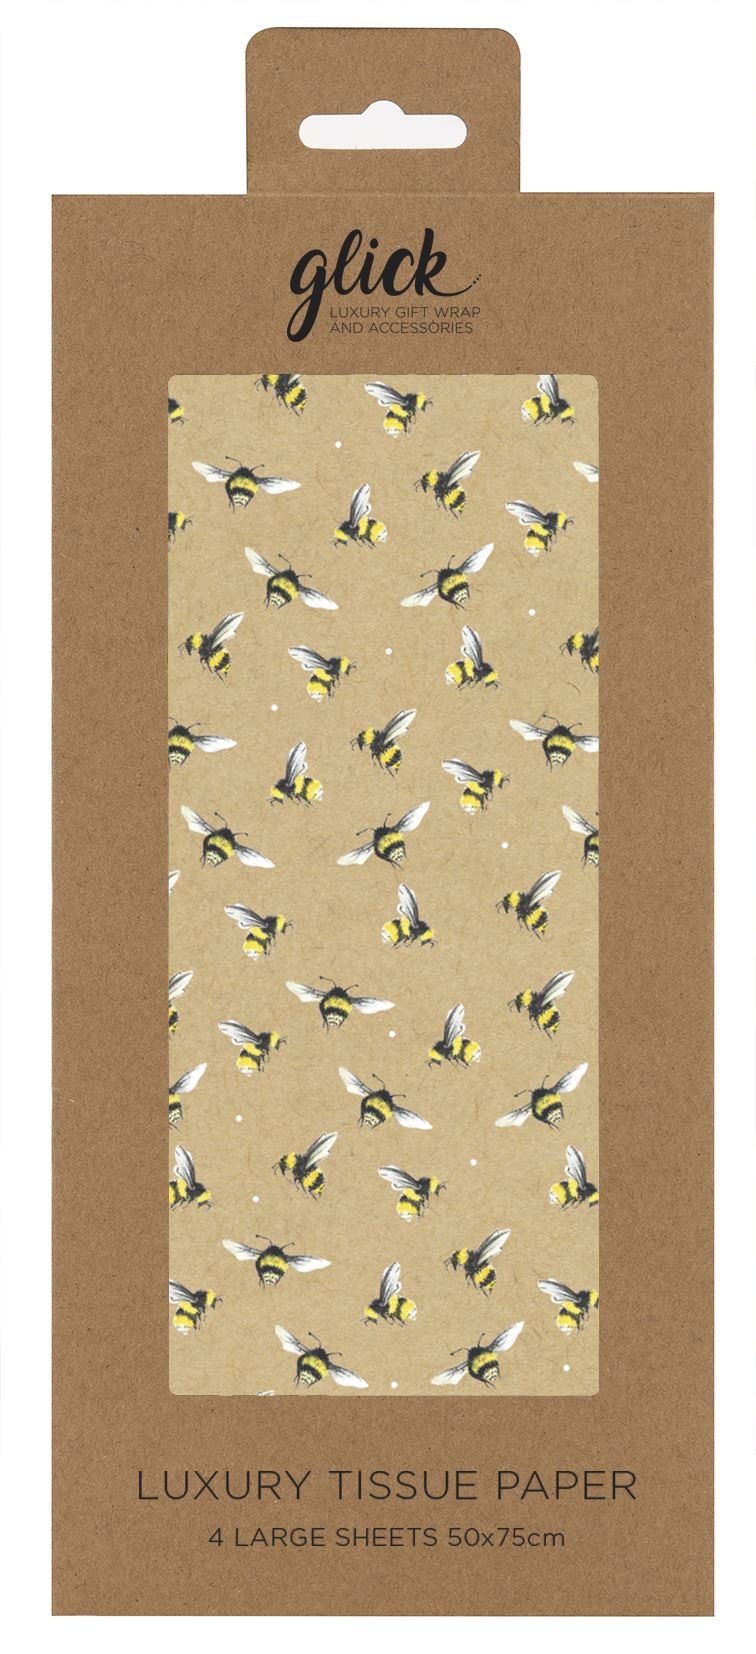 Kraft brown Retail packing for A rectangular sheet of tissue paper with a kraft brown background, covered in images of bees in flight.